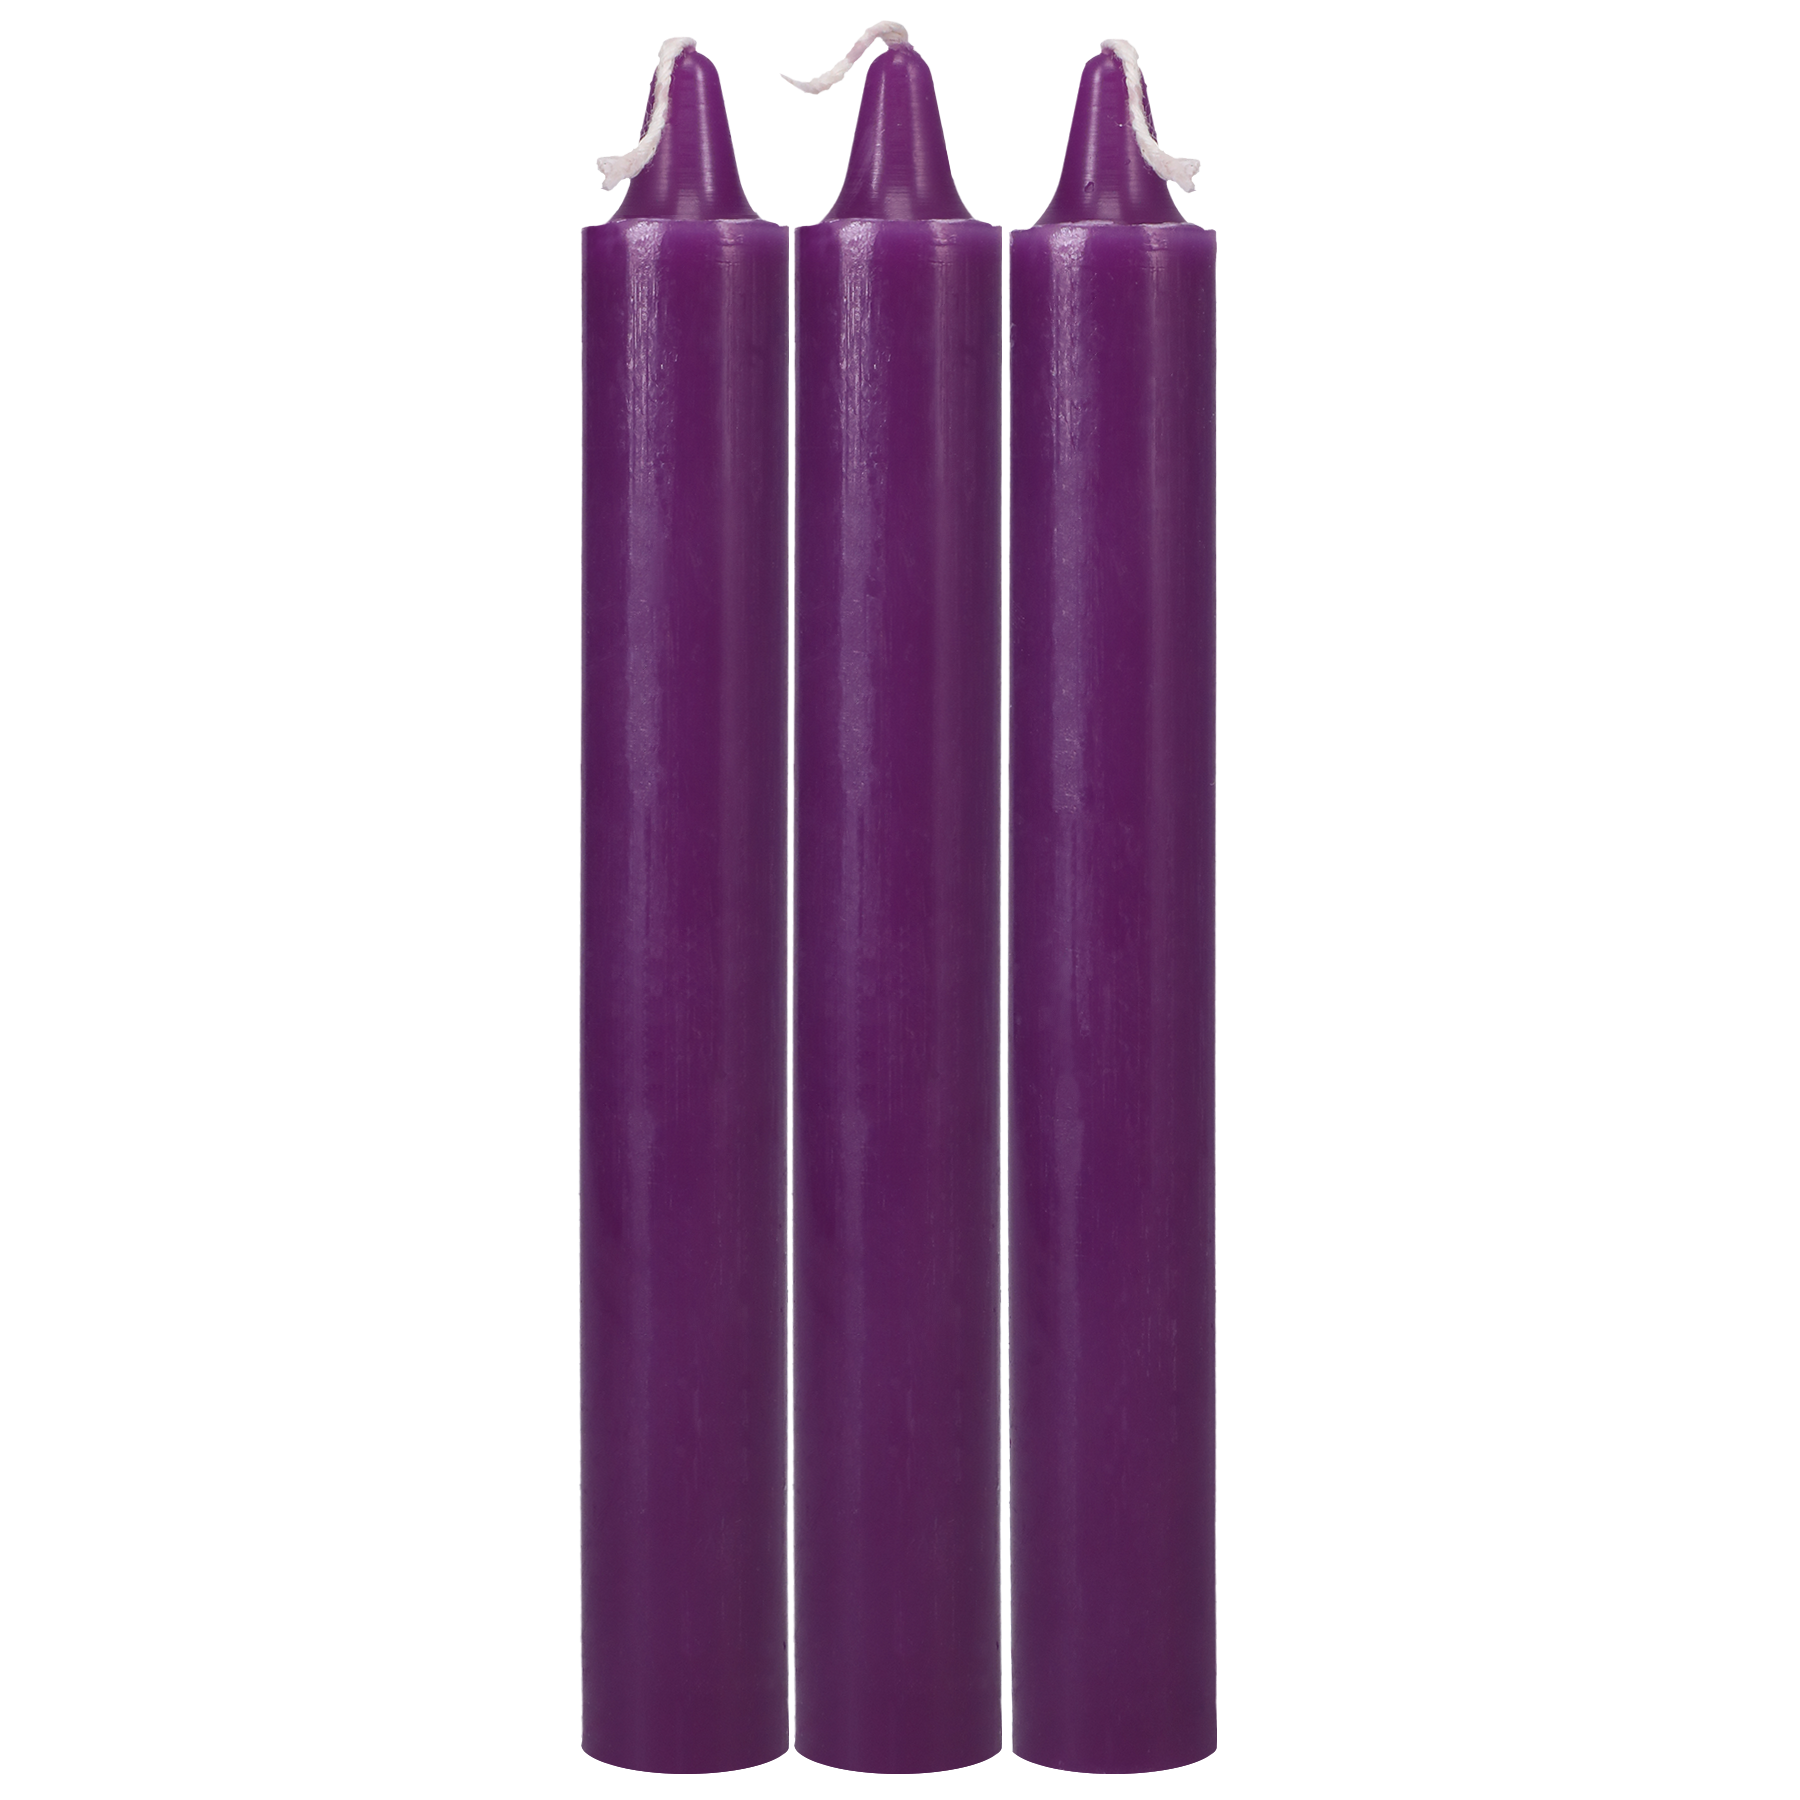 Japanese Drip Candles - Set of 3, Purple - Thorn & Feather Sex Toy Canada